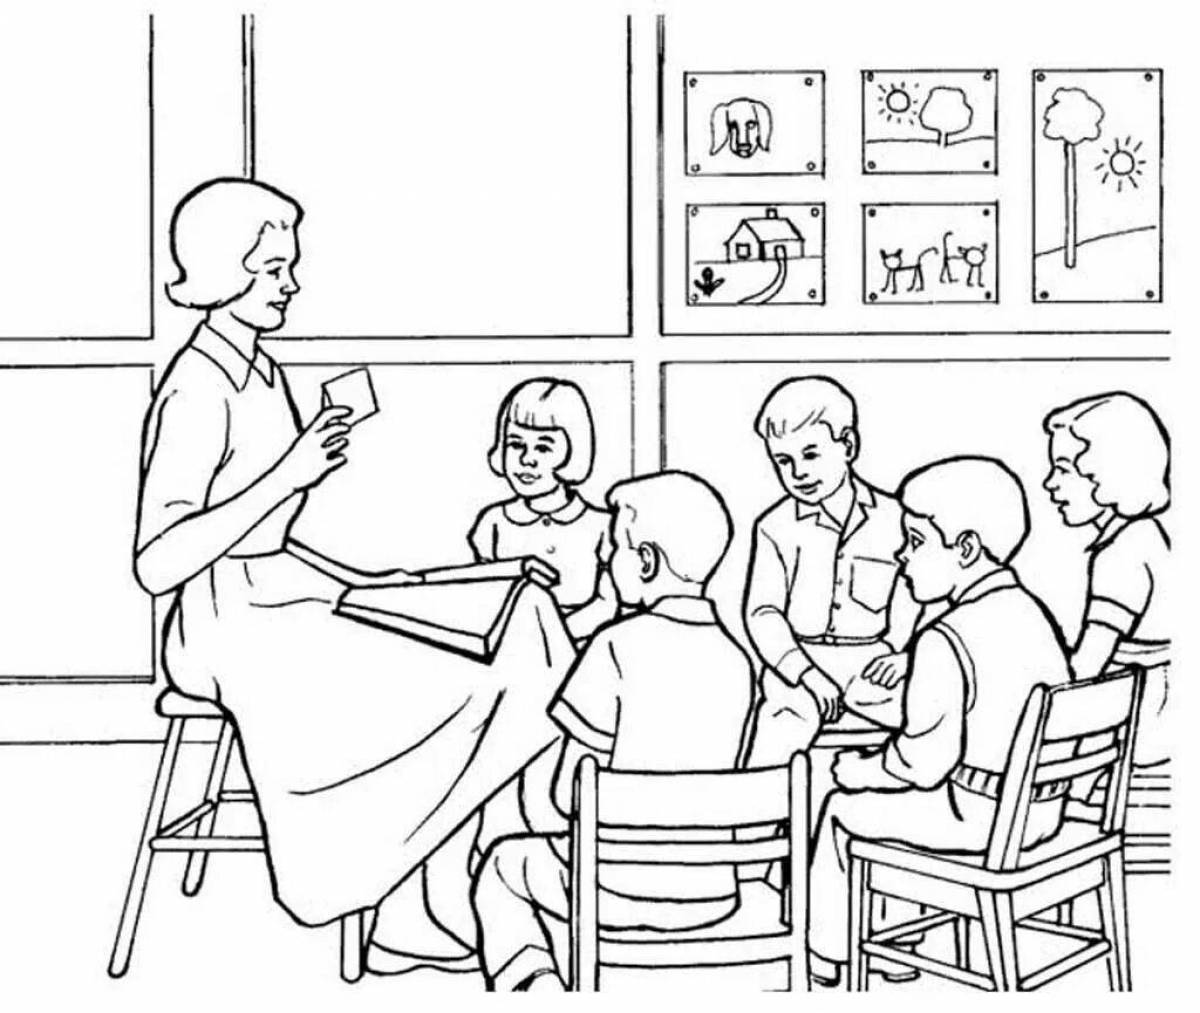 Charming school life coloring page